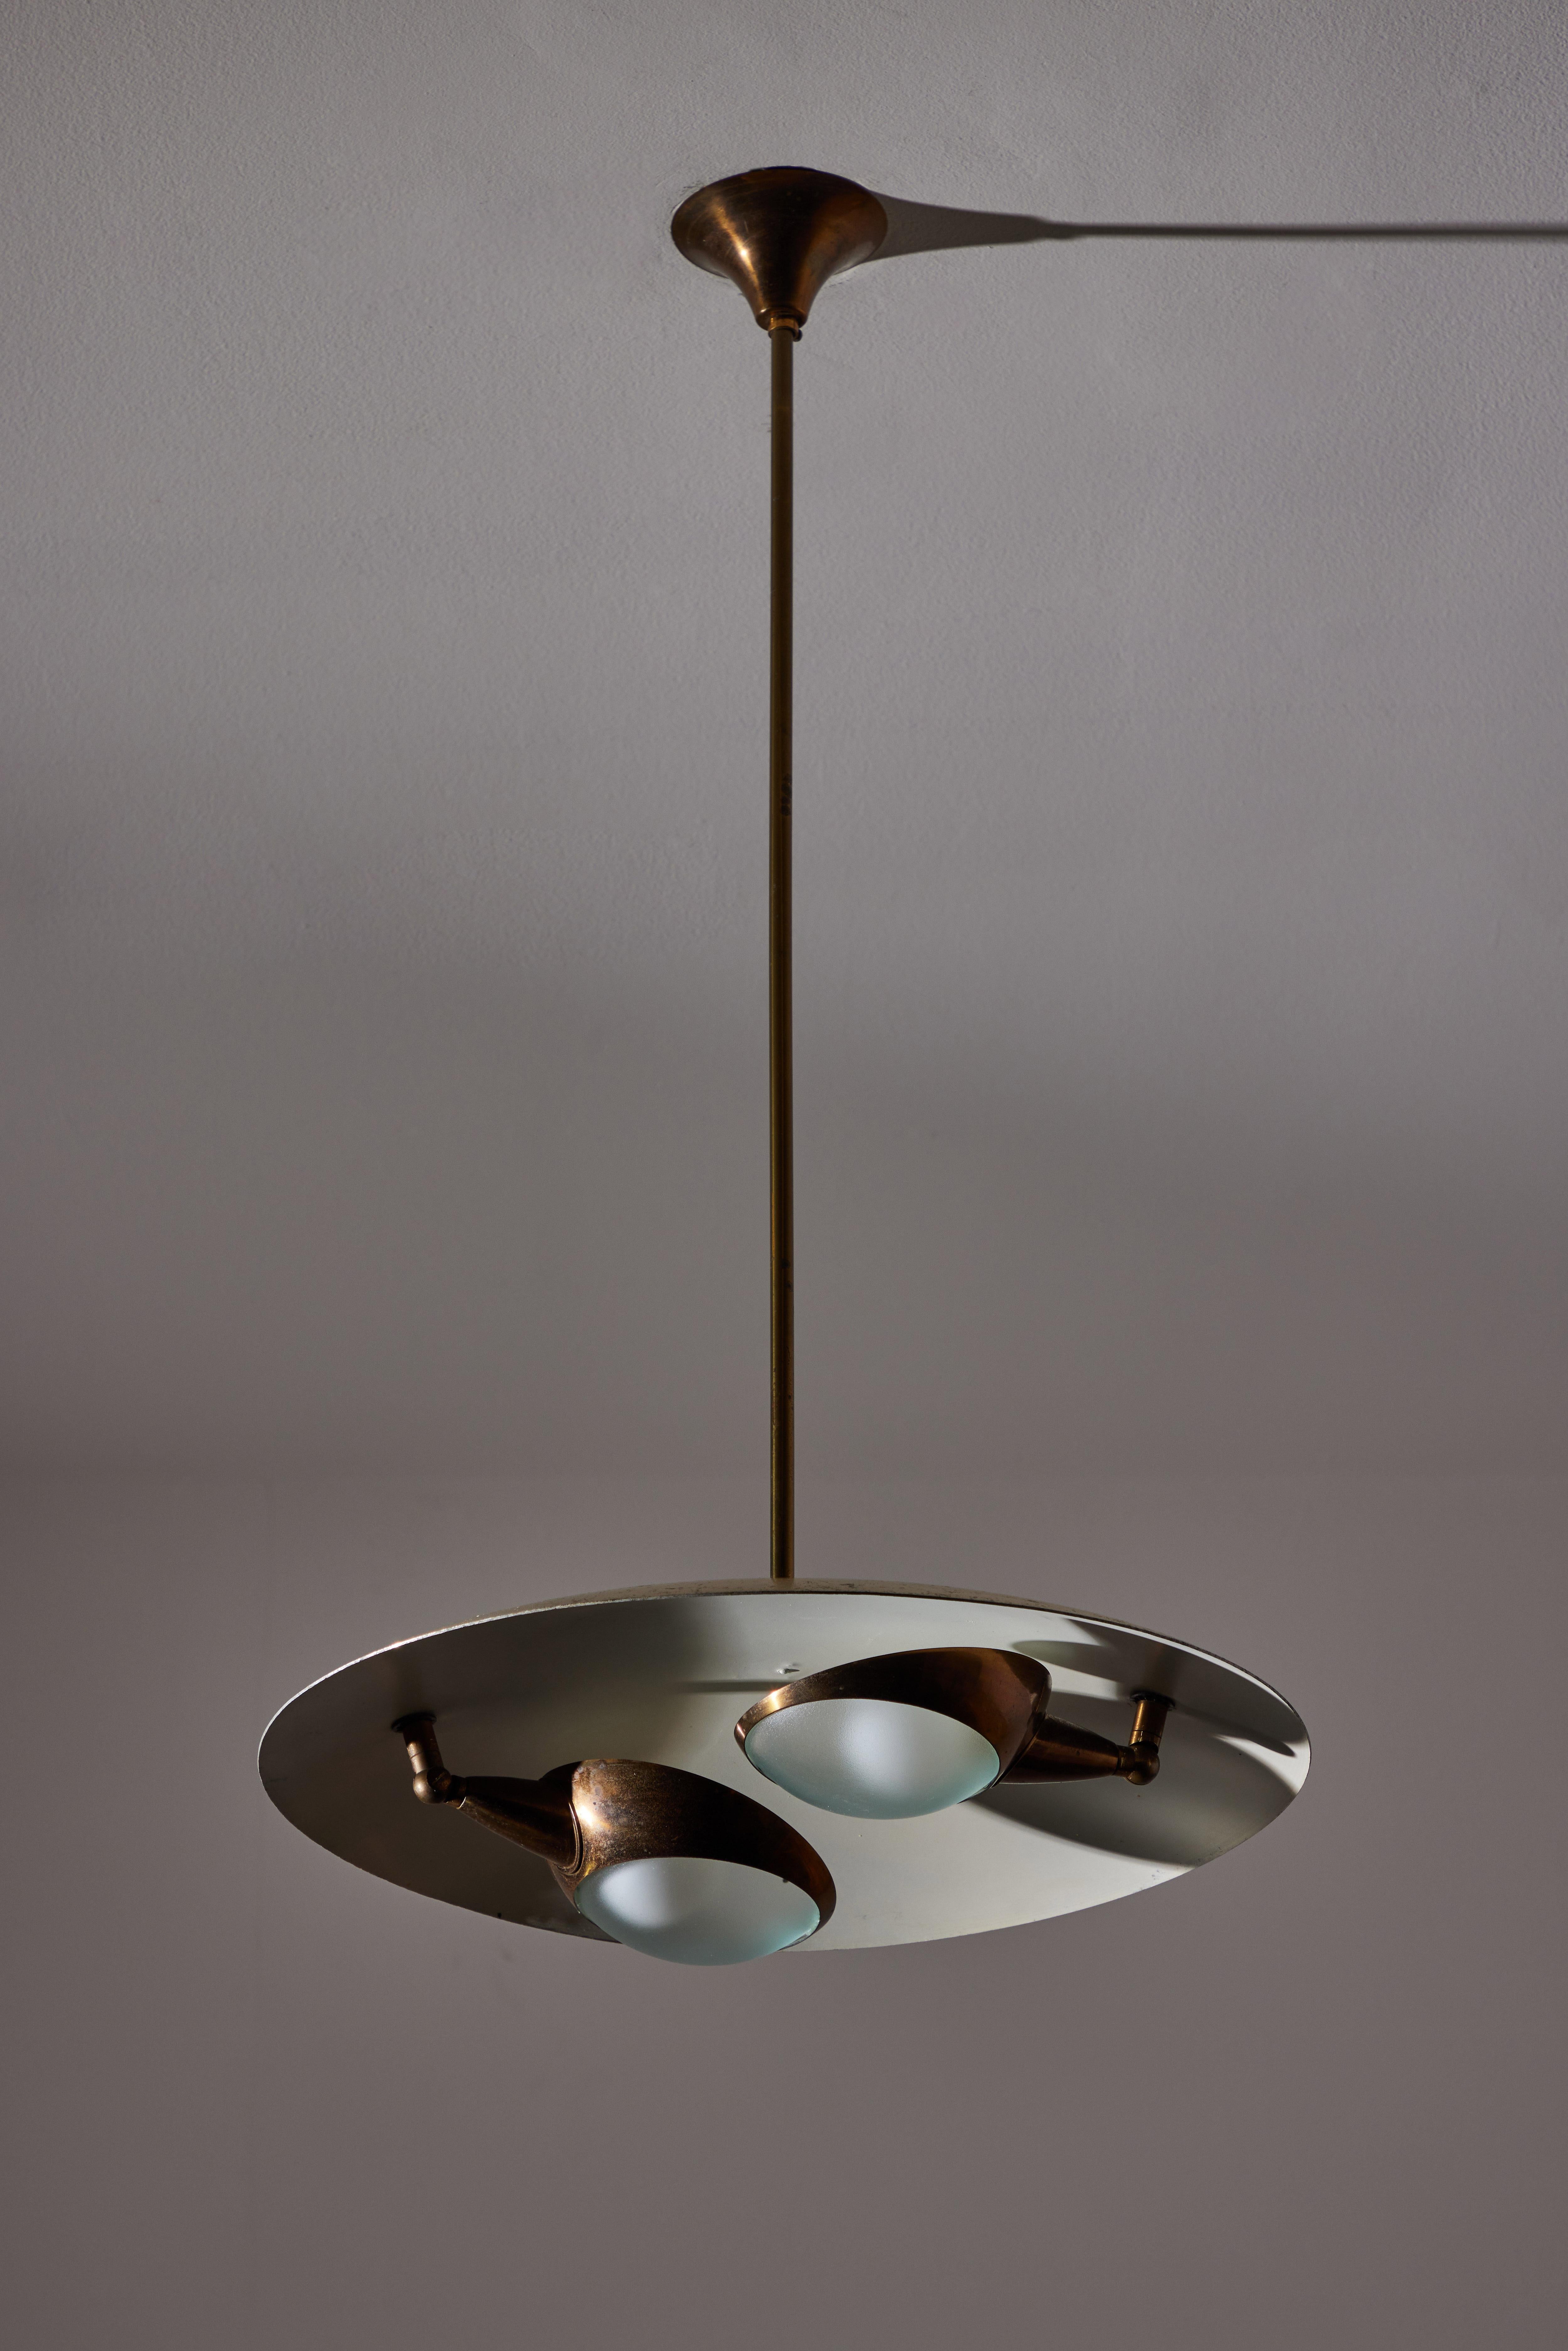 Ceiling light by Stilnovo. Manufactured in Italy, circa 1950's. Enameled metal, brass, glass. Wired for U.S. standards. Original canopy, custom brass backplate. We recommend two E14 60w maximum candelabra bulbs. Bulbs provided as a one time courtesy.